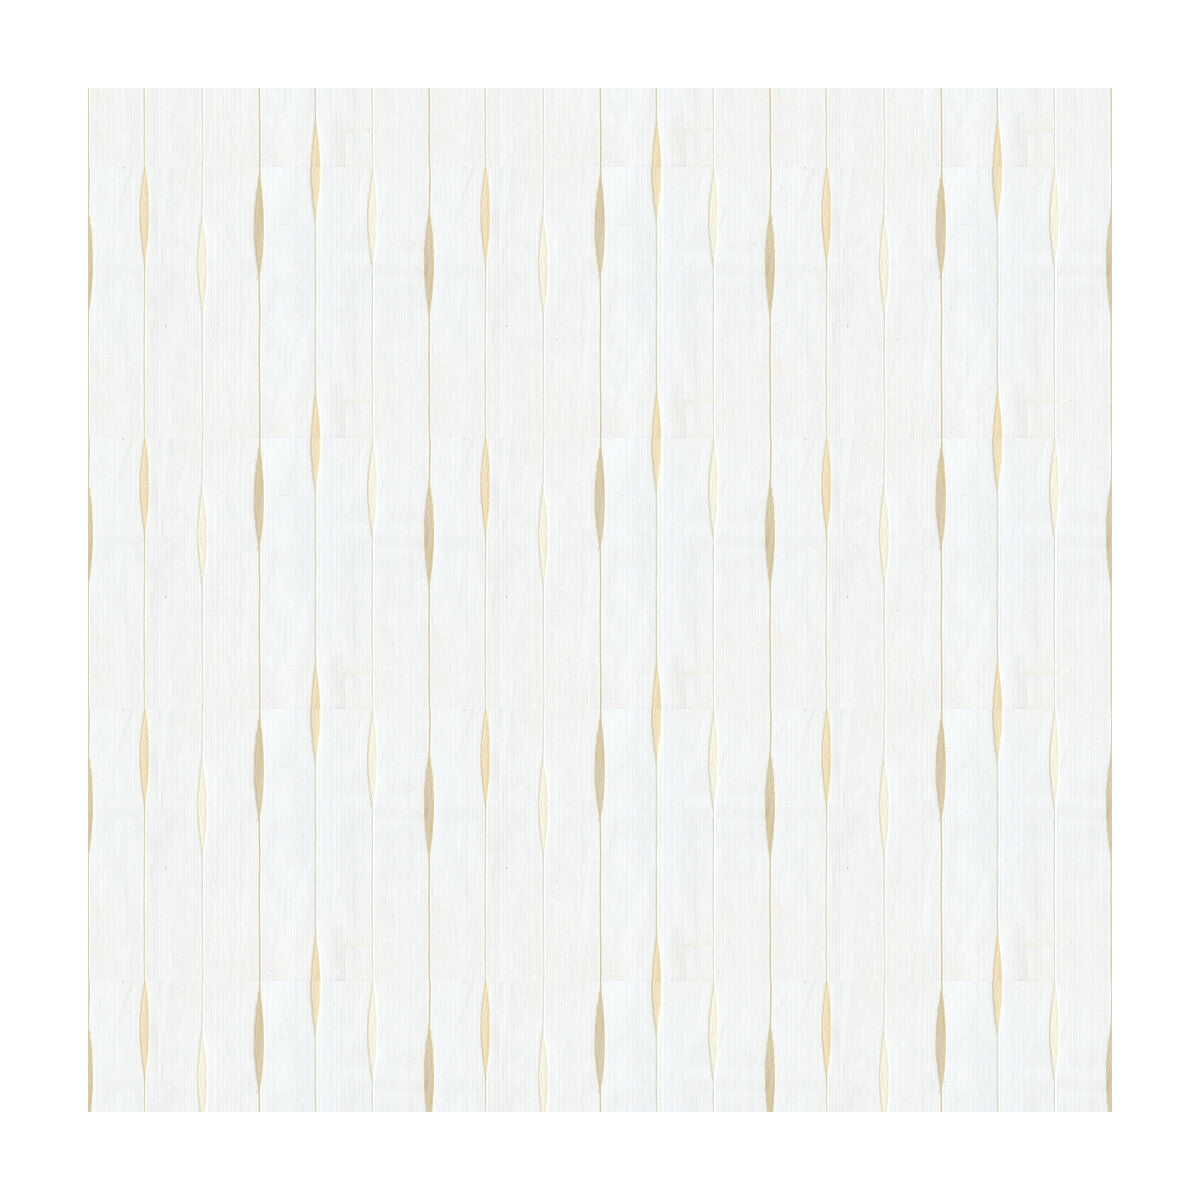 Kravet Contract fabric in 4160-16 color - pattern 4160.16.0 - by Kravet Contract